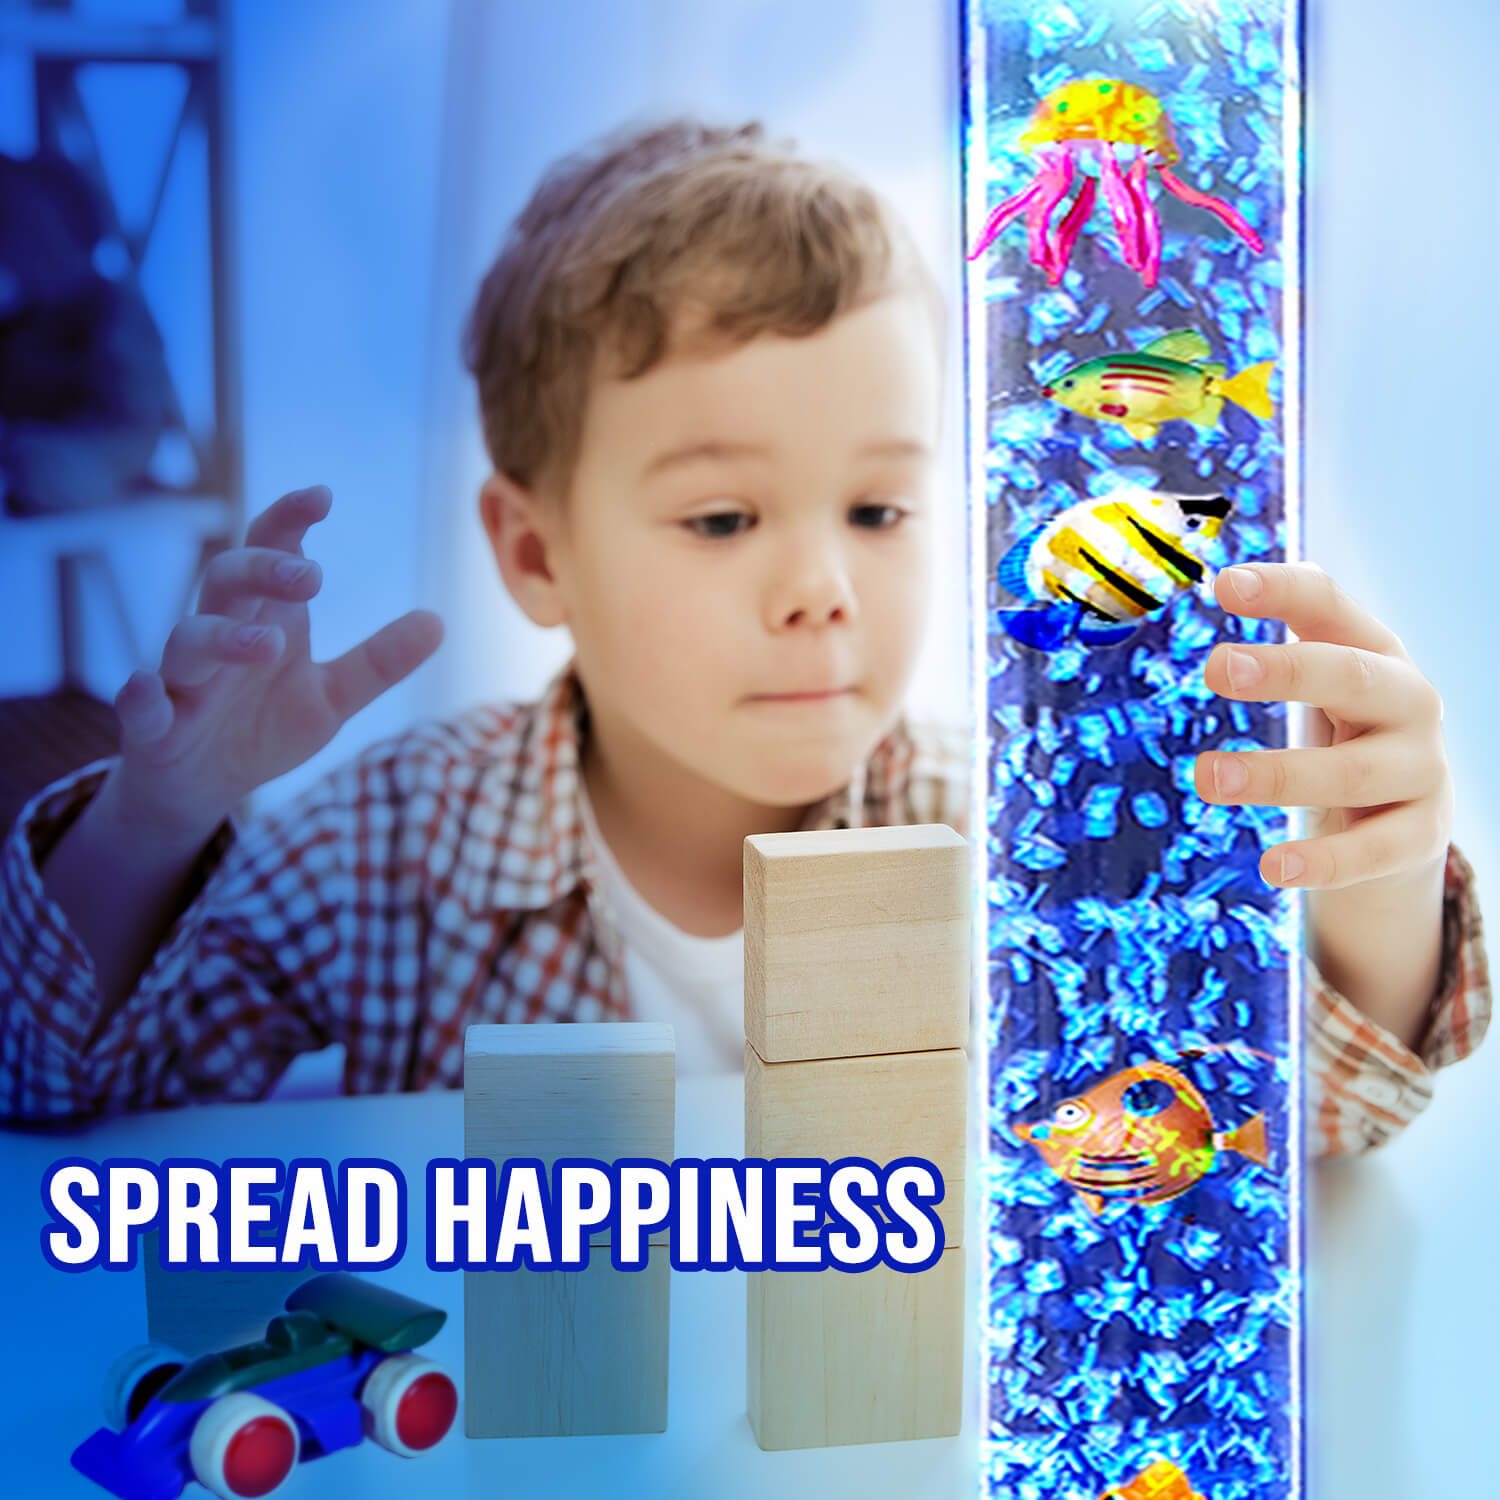 AUTISM KIDS AND SENSORY LAMPS - Brewish Store